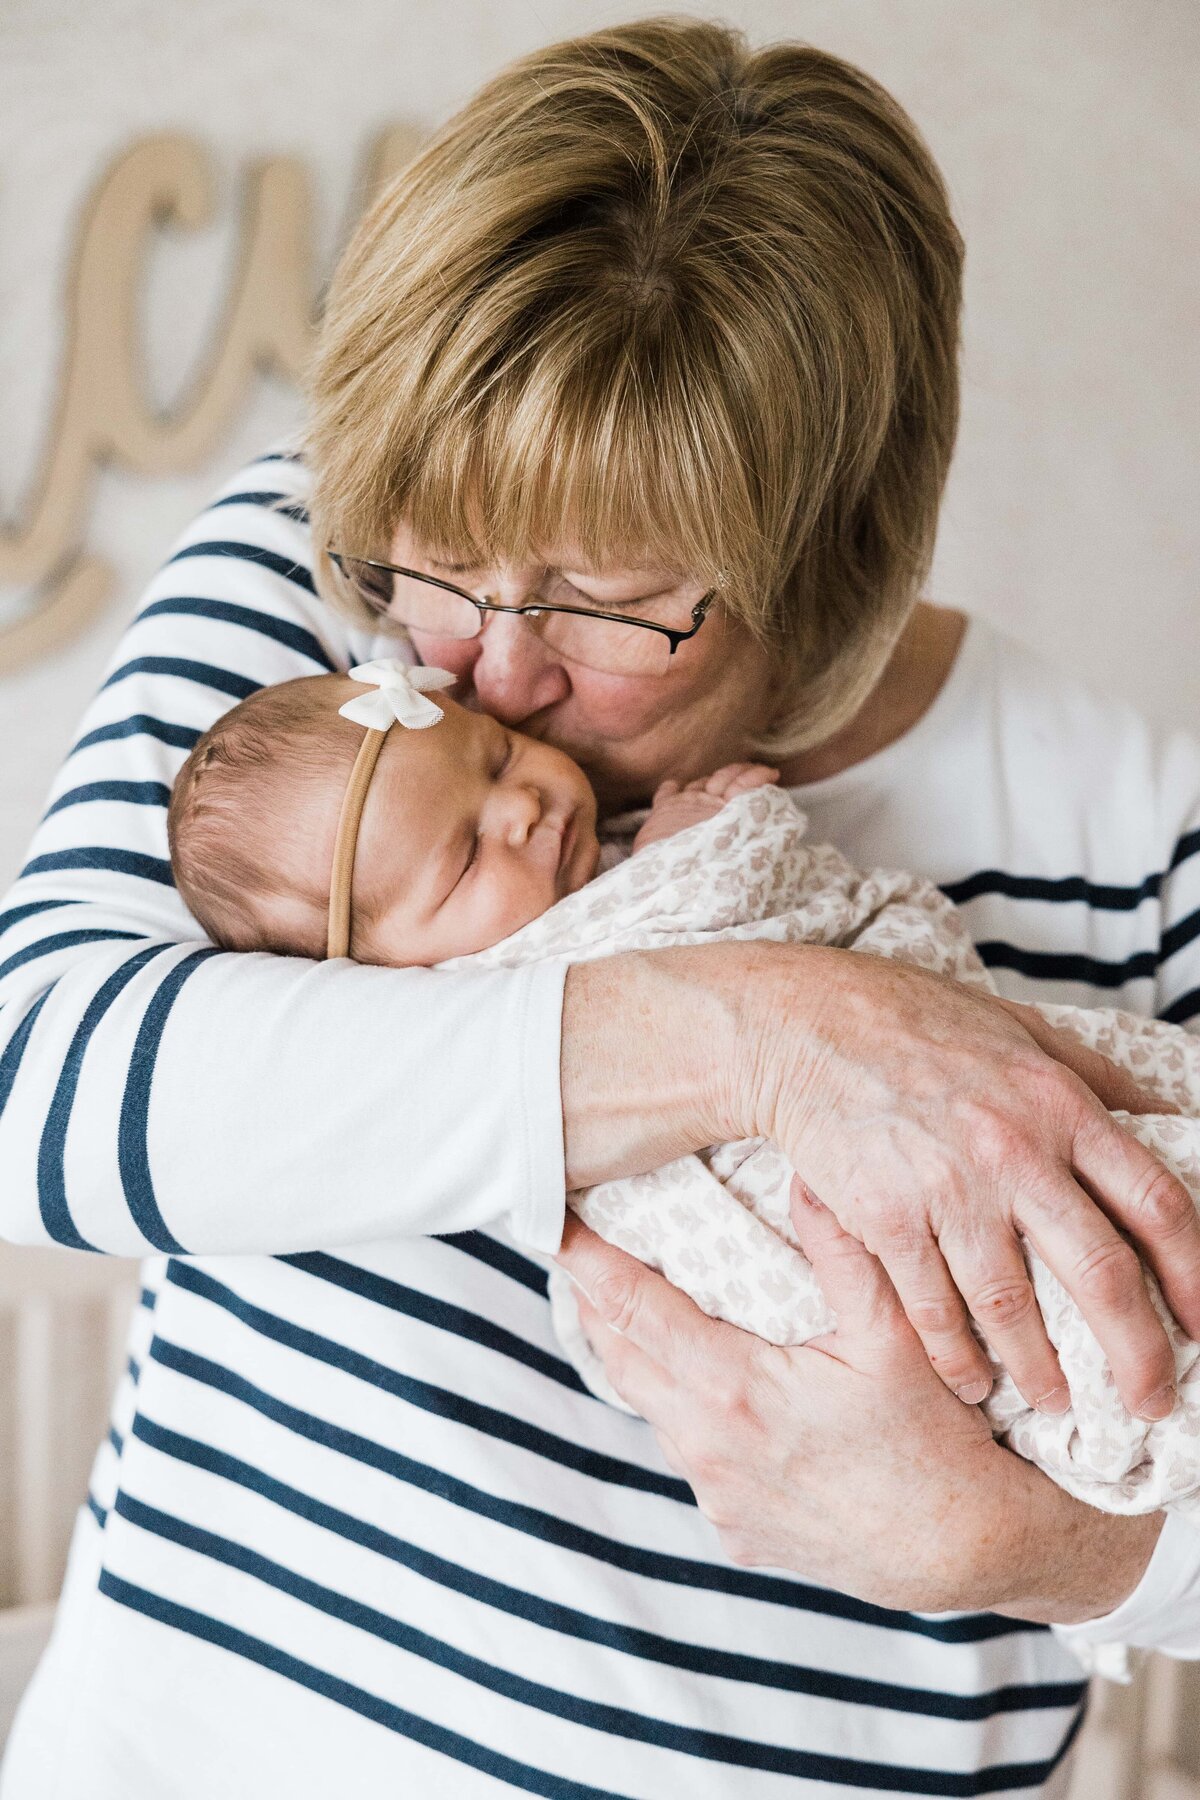 An older woman tenderly embracing a newborn baby during an in-home newborn photography session.